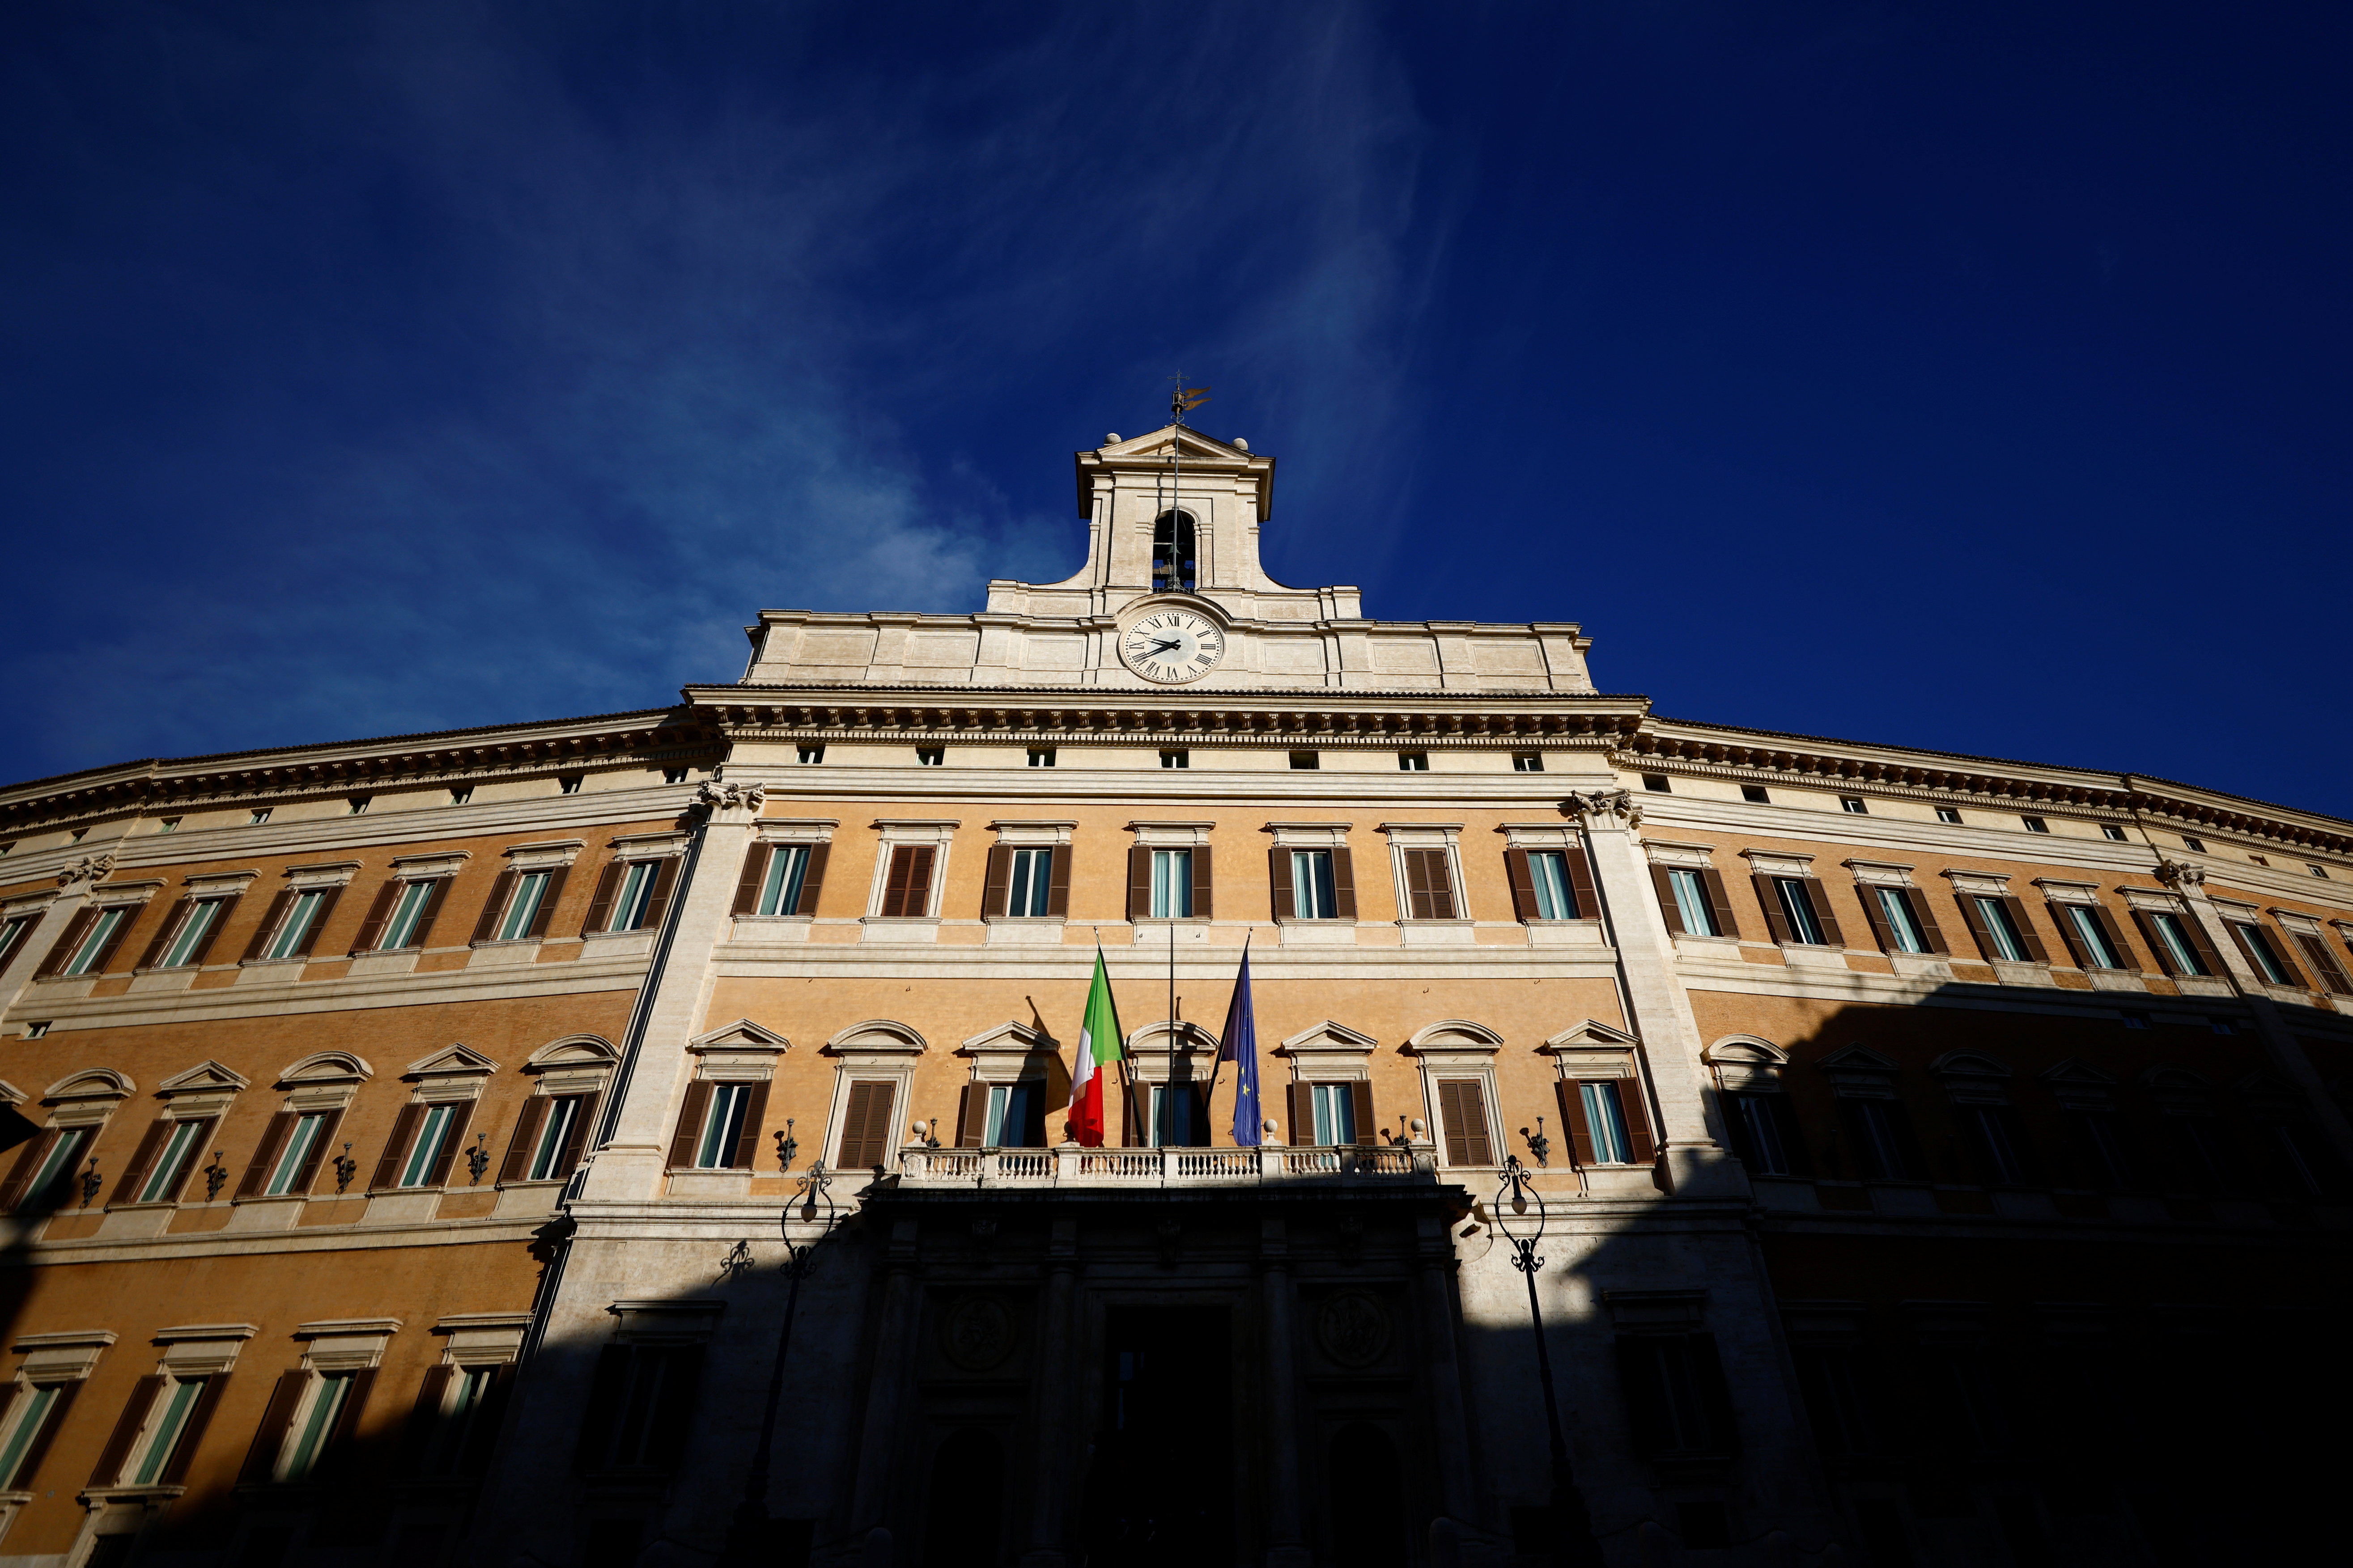 A general view of Montecitorio Palace, the lower house of Parliament, in Rome